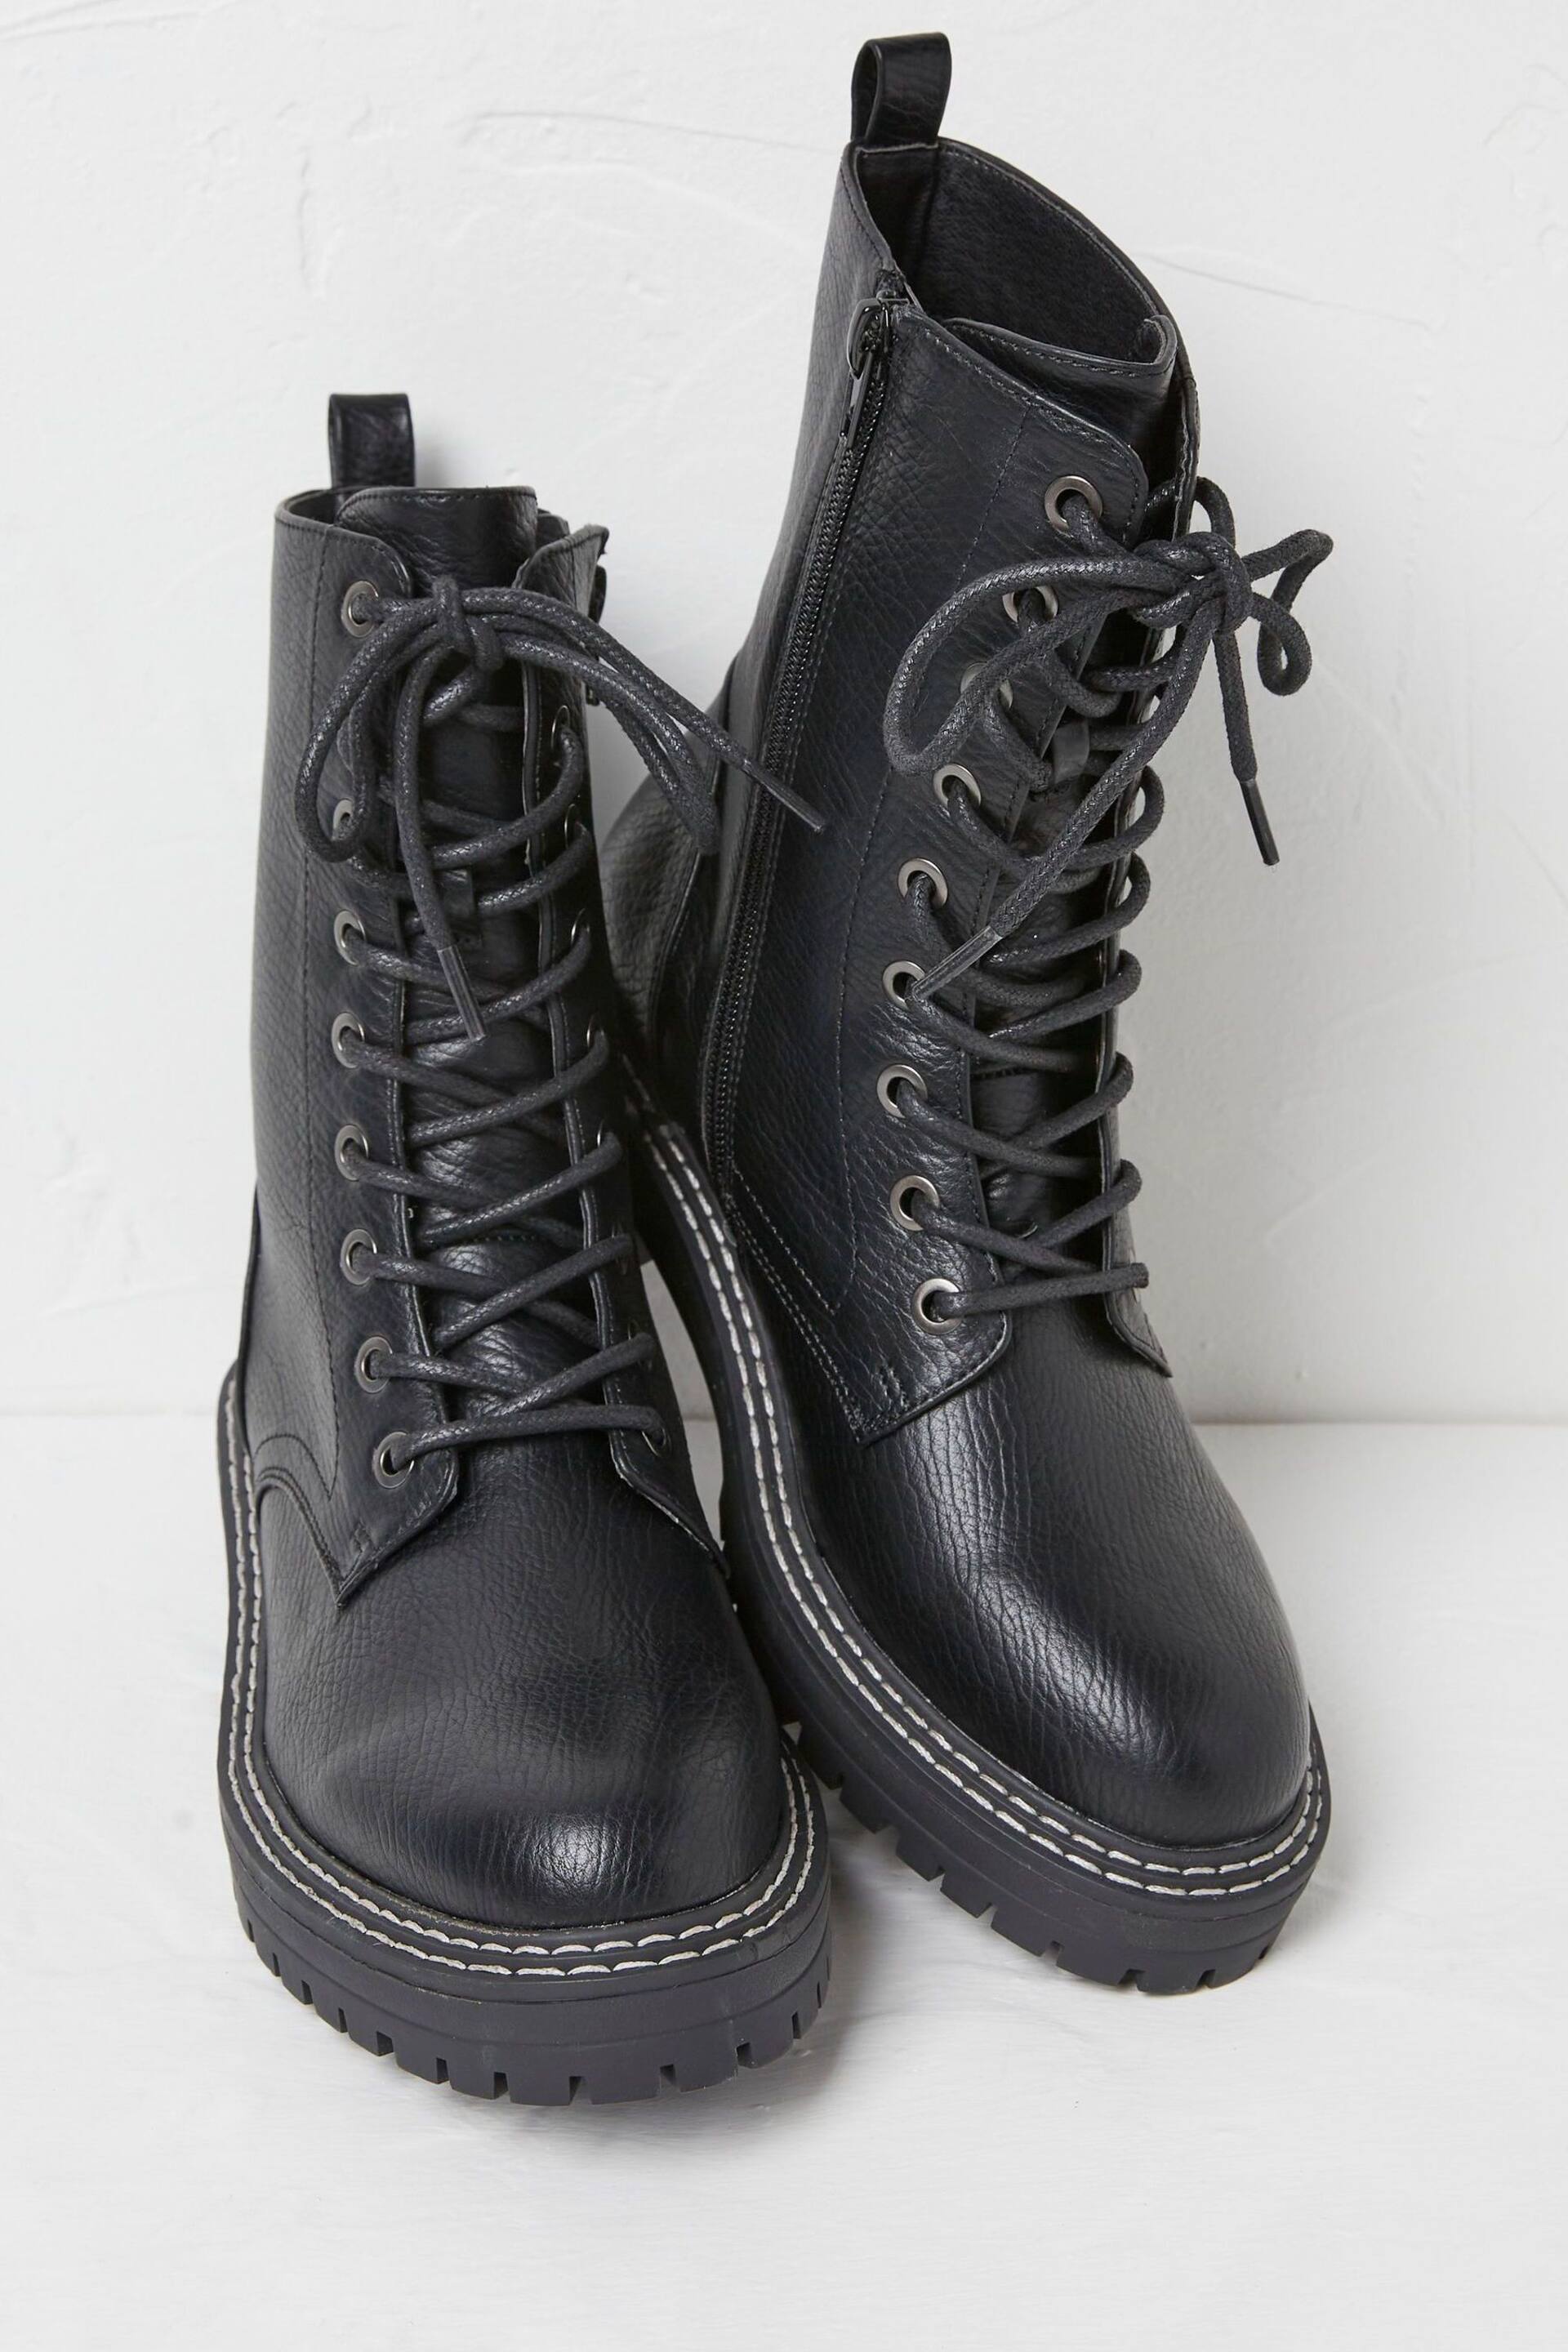 FatFace Black Violet Mid Chunky Lace Up Boots - Image 2 of 4